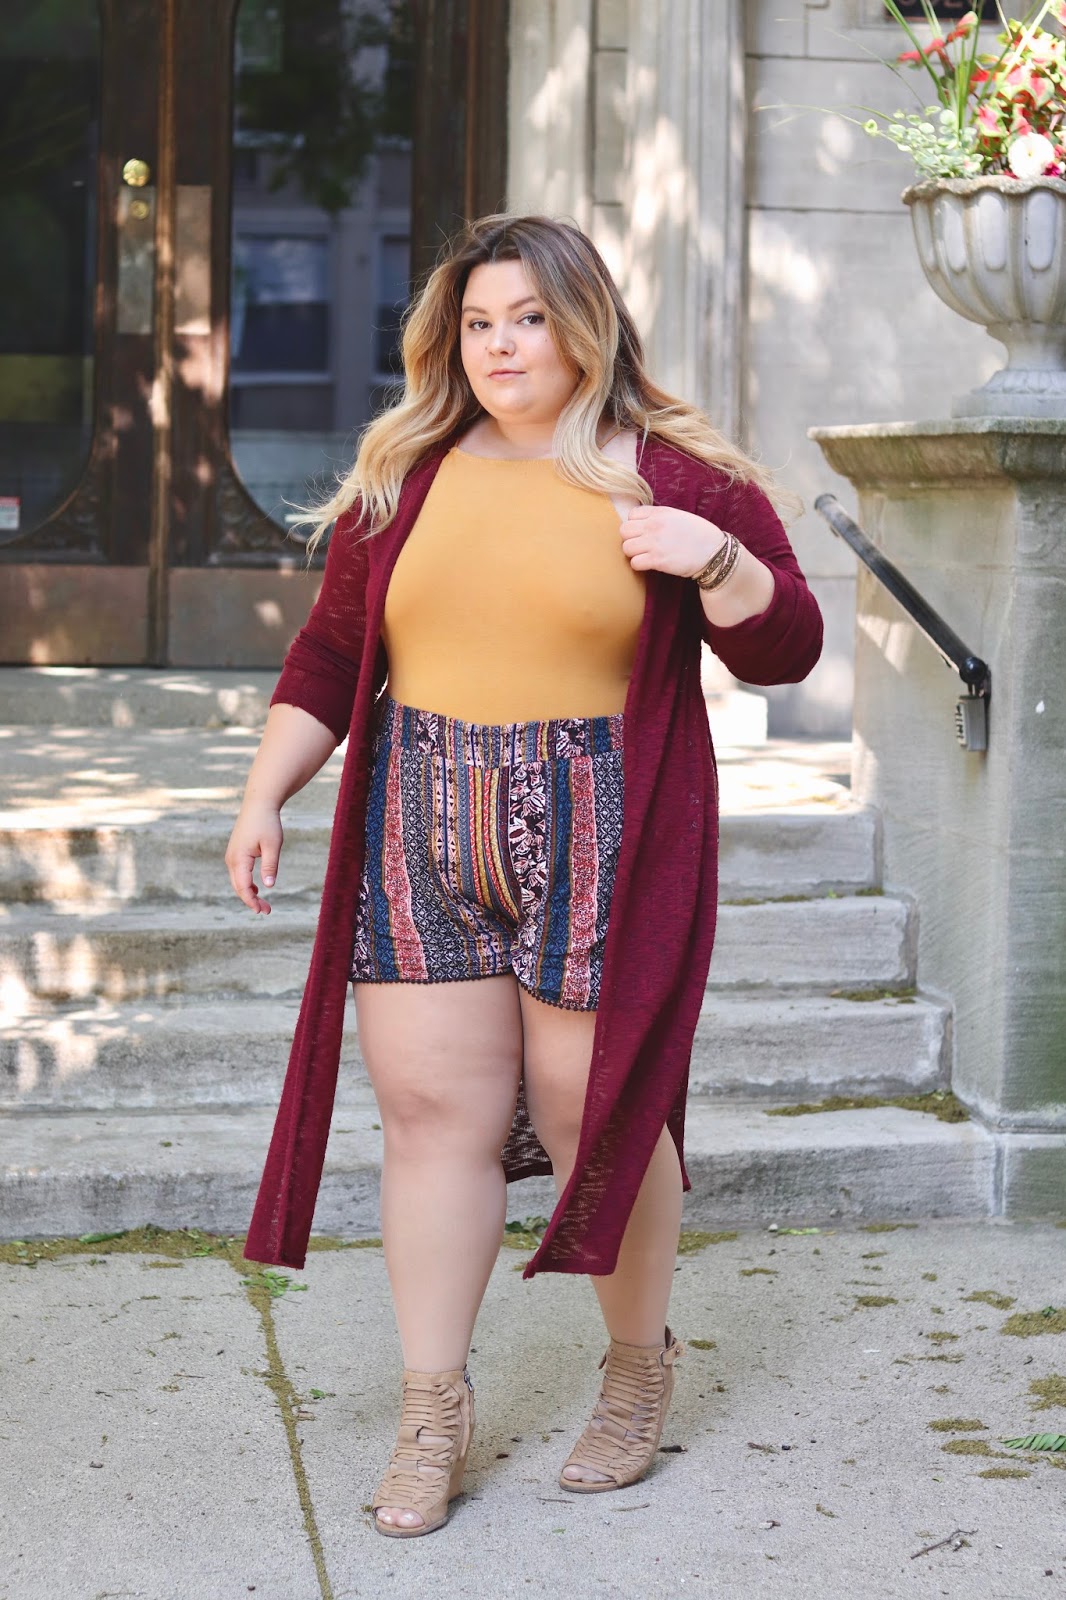 boho chic, plus size shorts, affordable plus size clothes, natalie craig, natalie in the city, Chicago fashion blogger, plus size blogger, Chicago plus size, fatshion, curves and confidence, midwest style, plus size summer outfits, how to stop chub rub, chub rub, stitch fix, forever 21 plus, bodysuits, plus size bodysuits